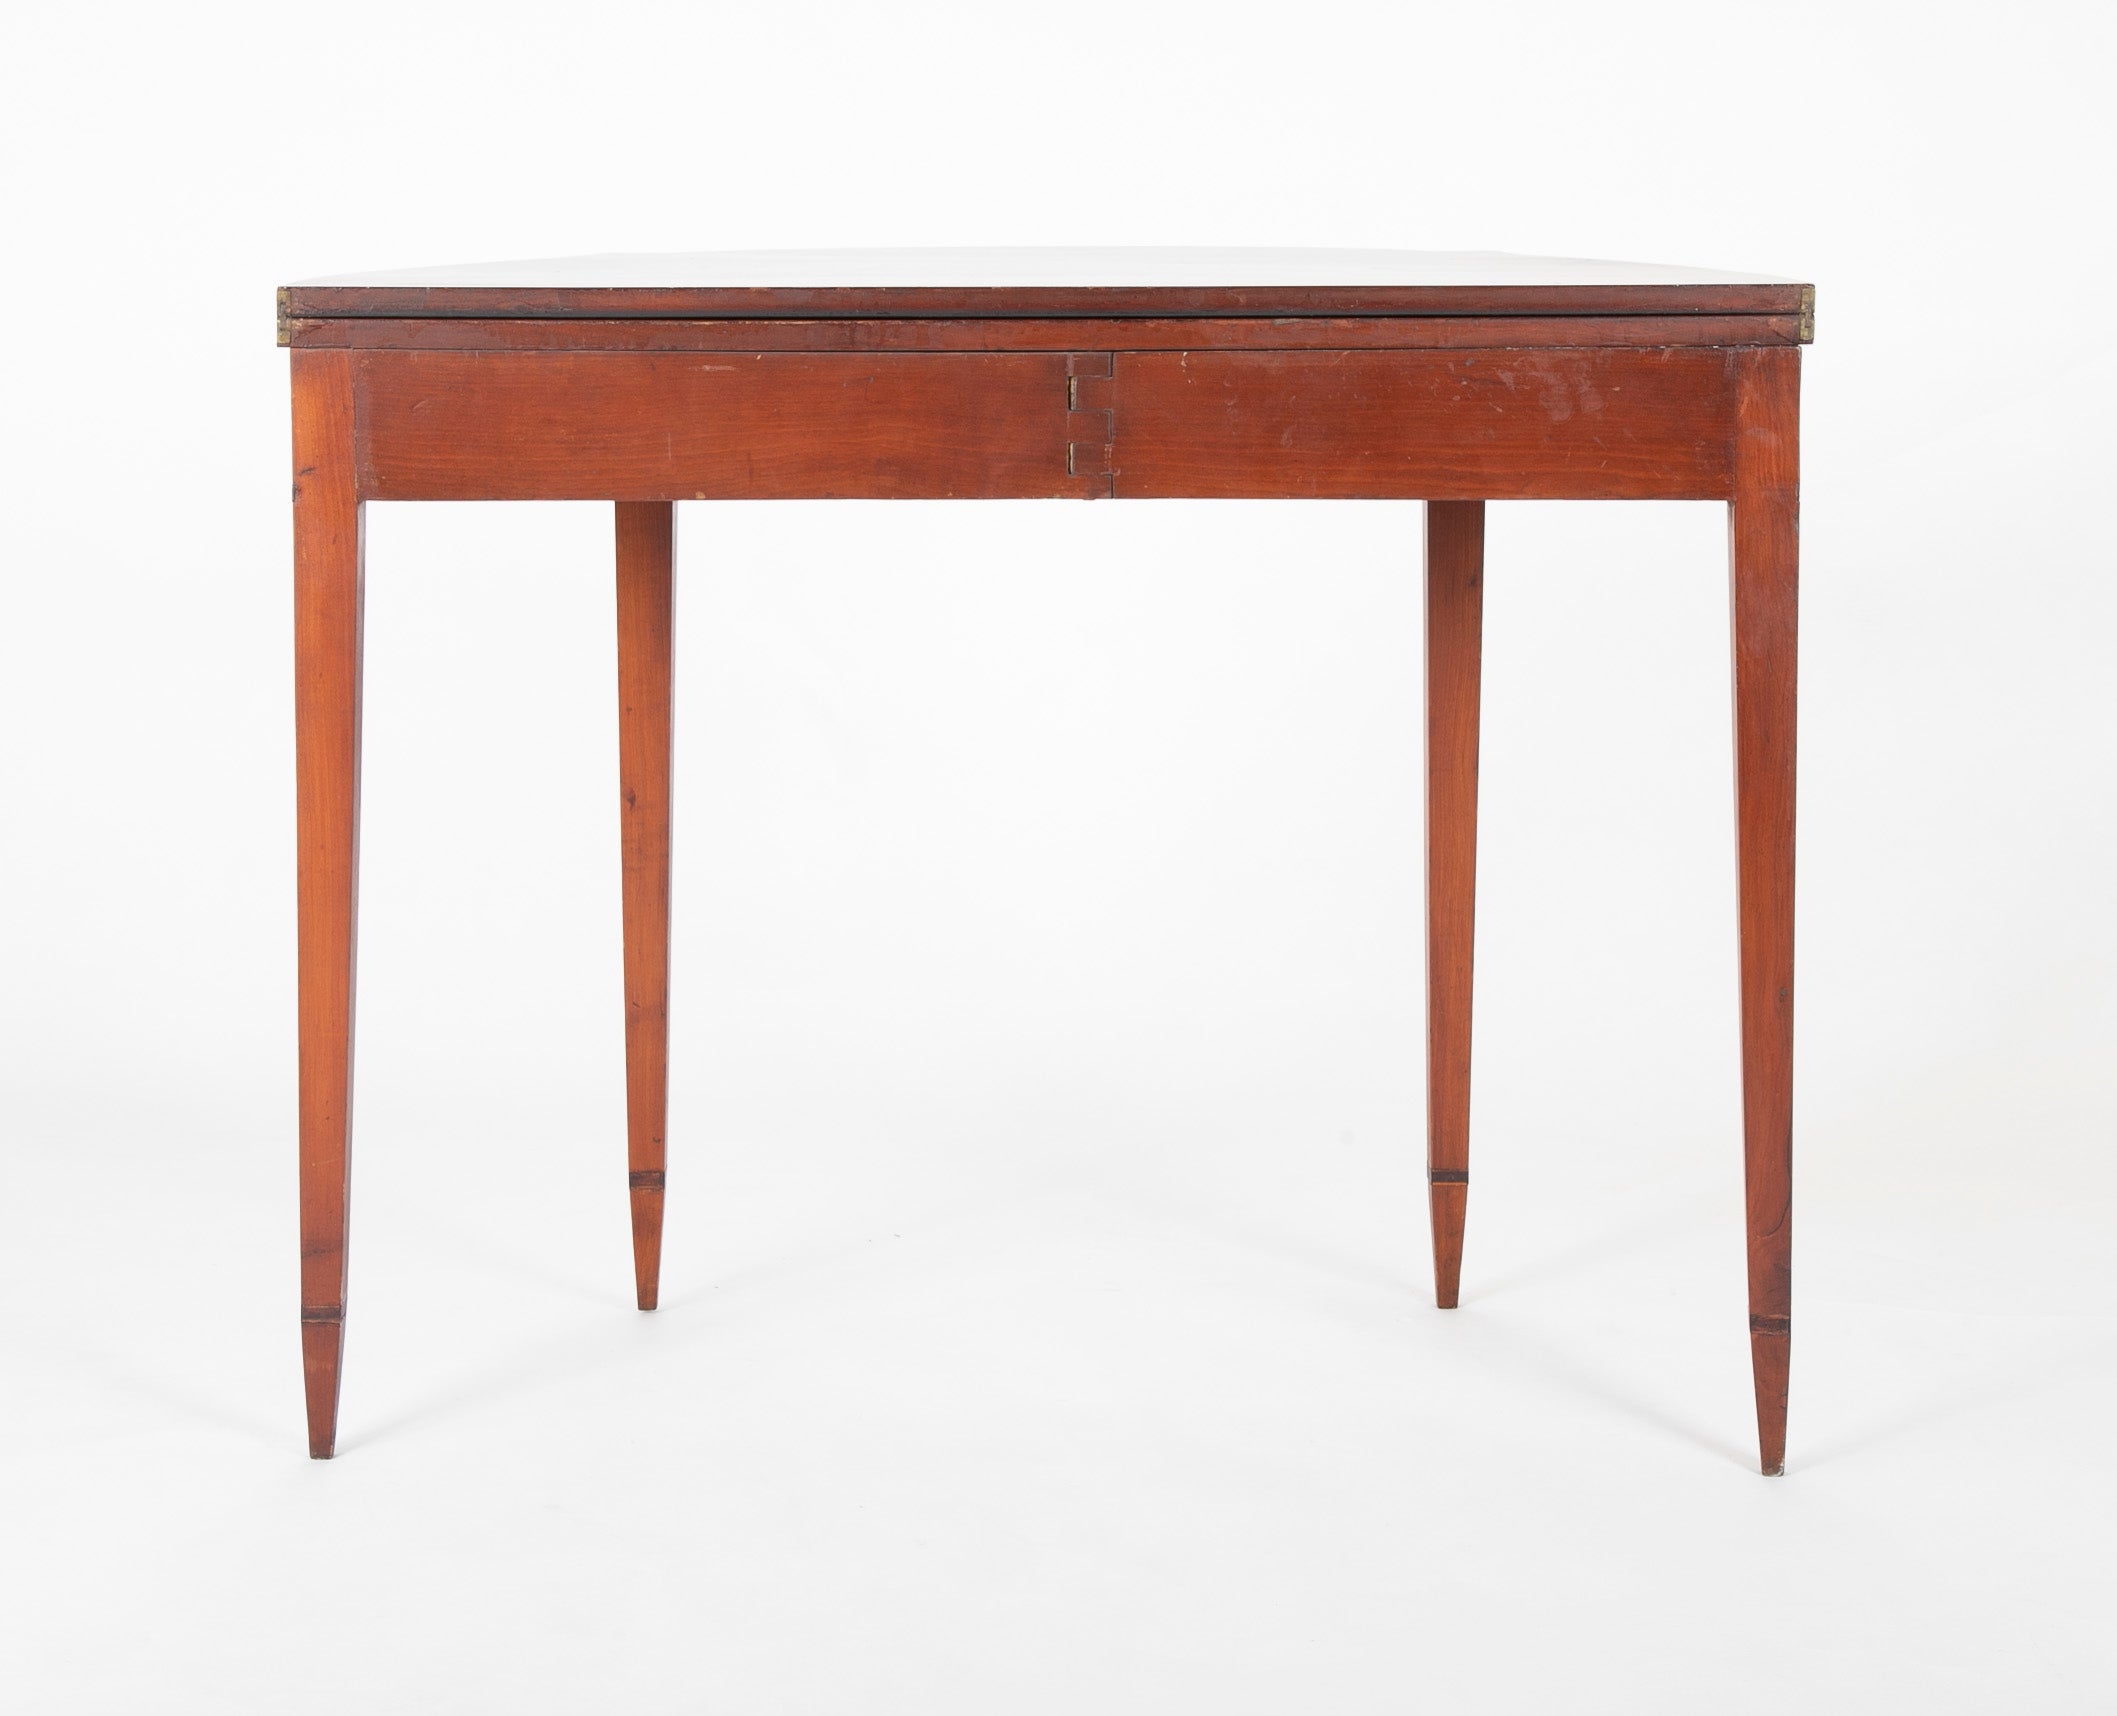 Boston Hepplewhite Cherry Card Table with Inlaid Woods